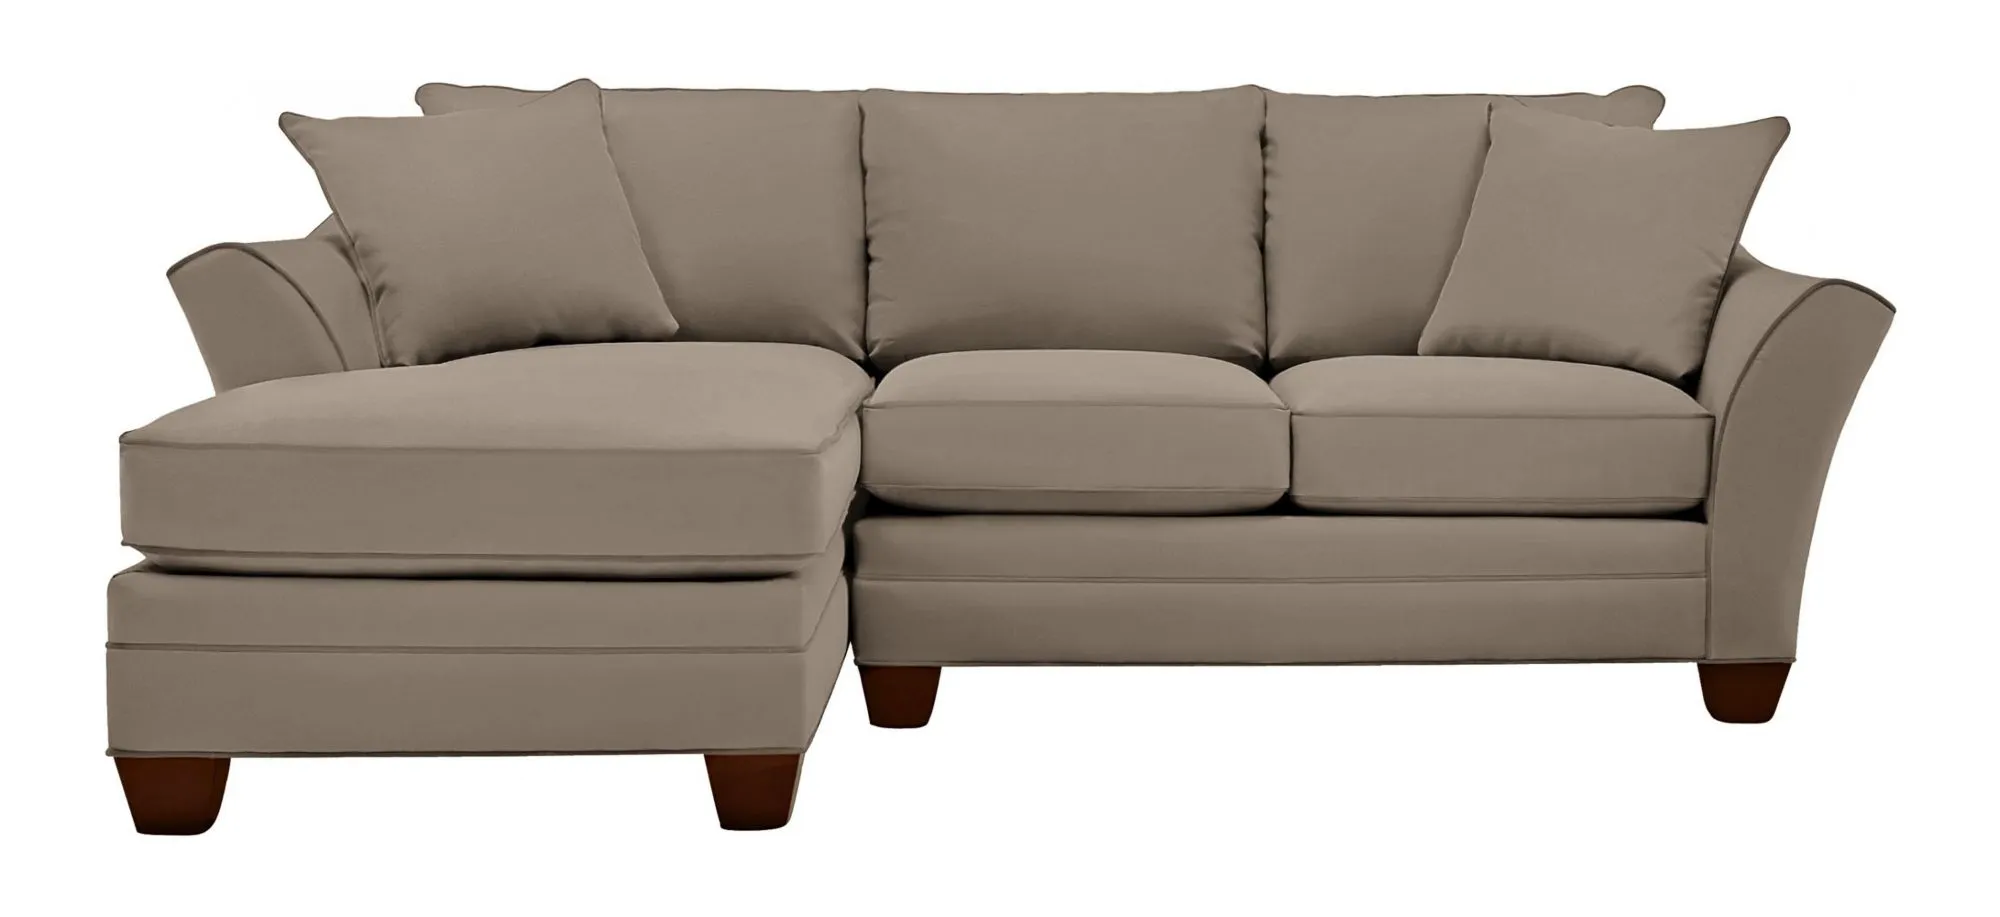 Foresthill 2-pc. Left Hand Chaise Sectional Sofa in Suede So Soft Mineral by H.M. Richards